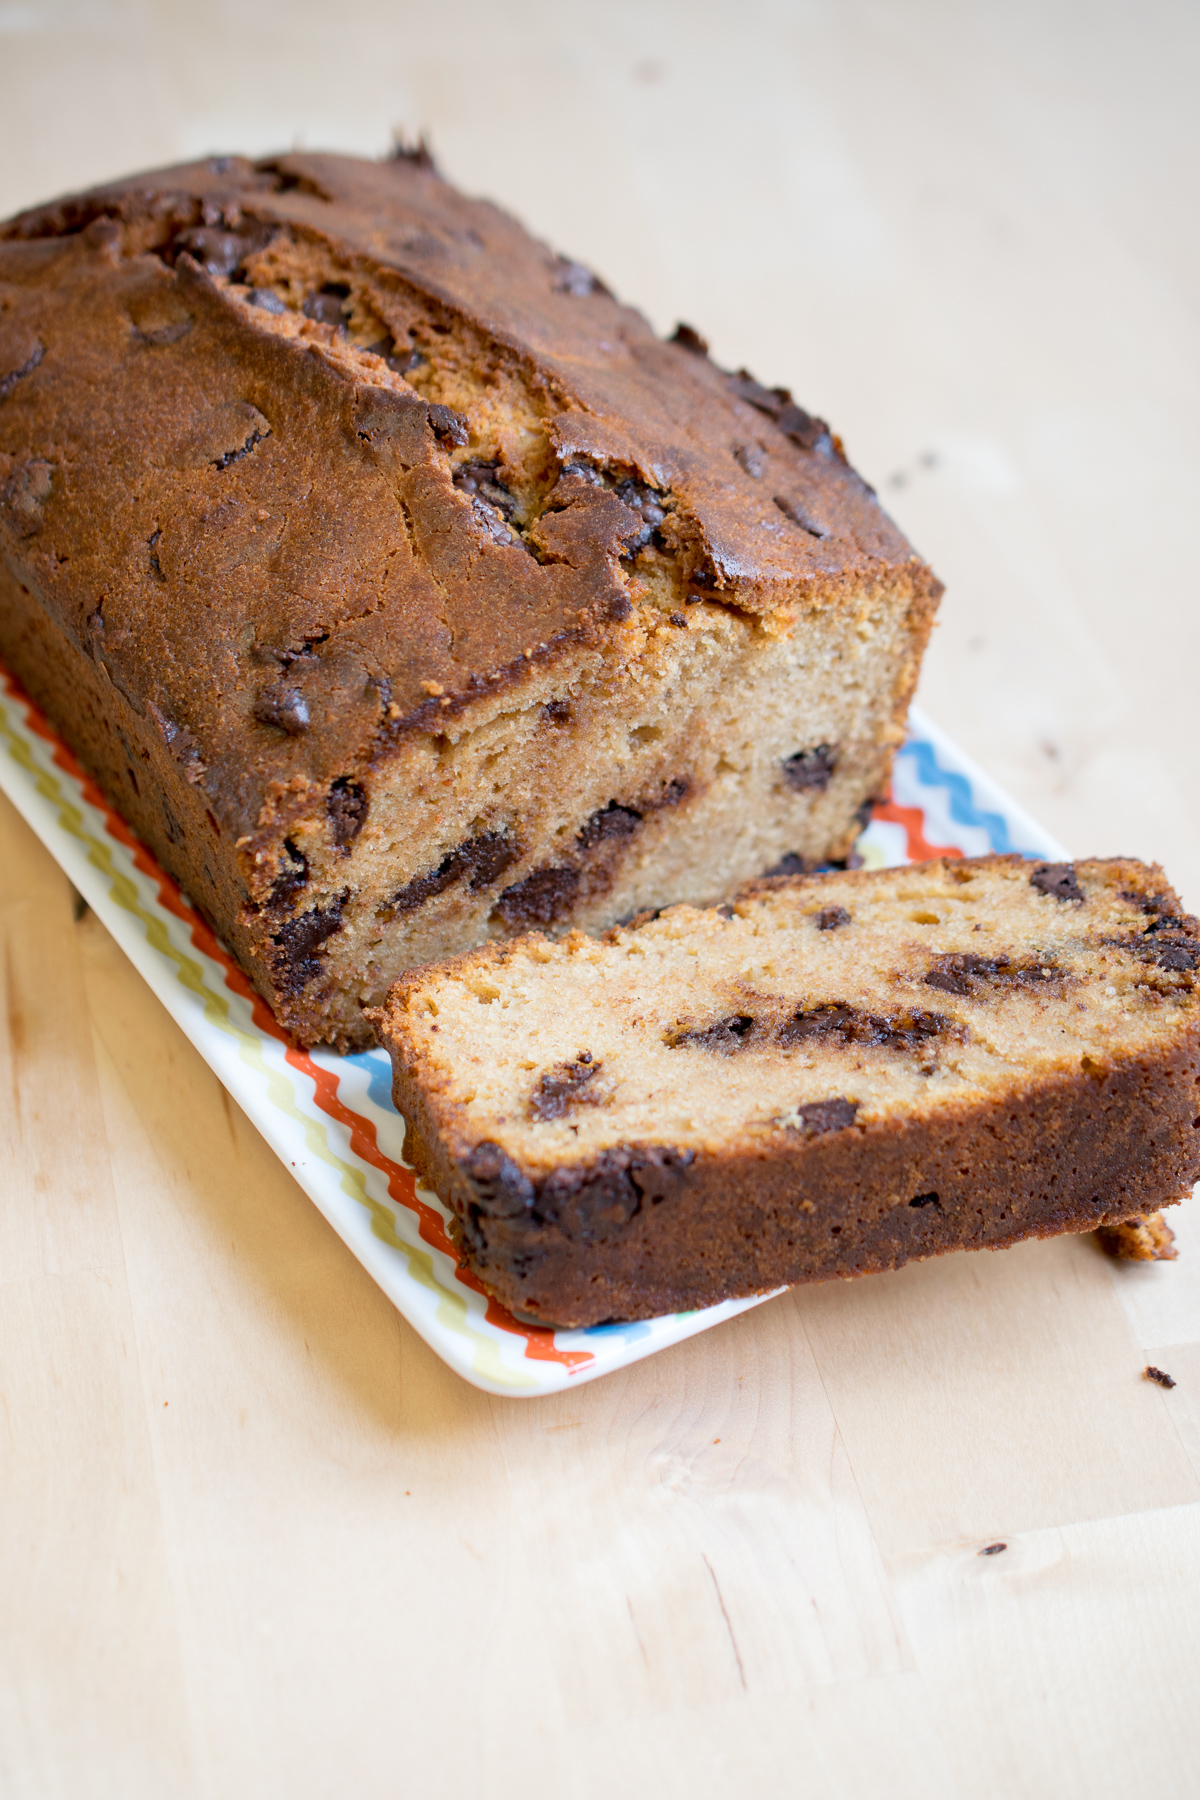 Choc chip caramel loaf cake - a simple cake made using caramelised condensed milk (dulce de leche) in place of sugar. And yes, it is as good as it sounds!